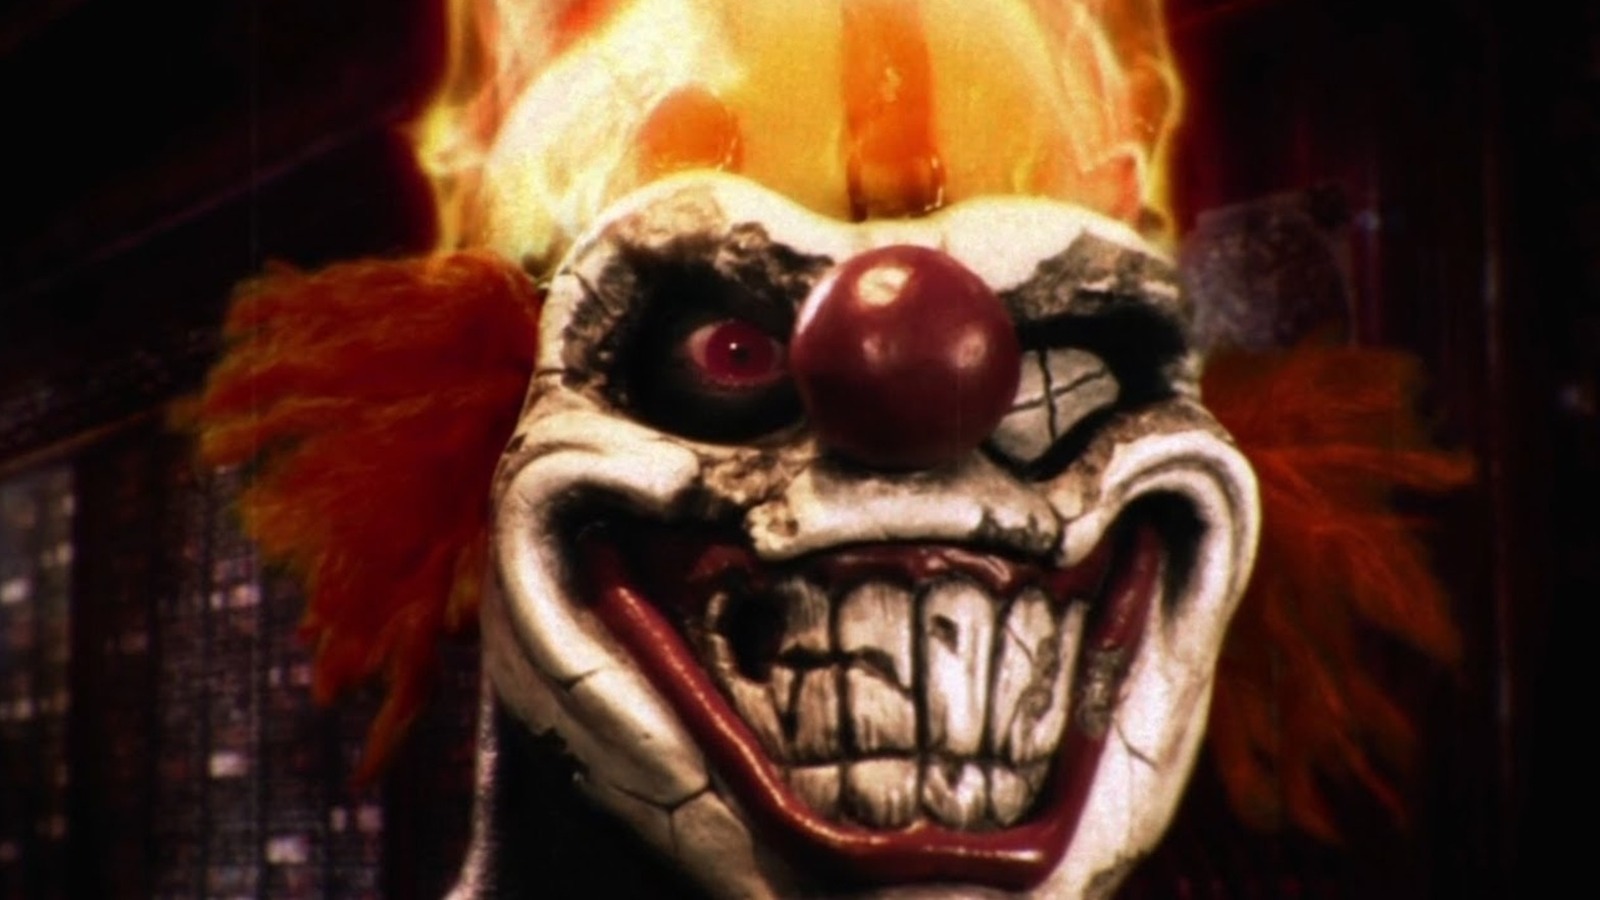 Twisted Metal' Show From 'Deadpool' Writers in the Works (EXCLUSIVE)